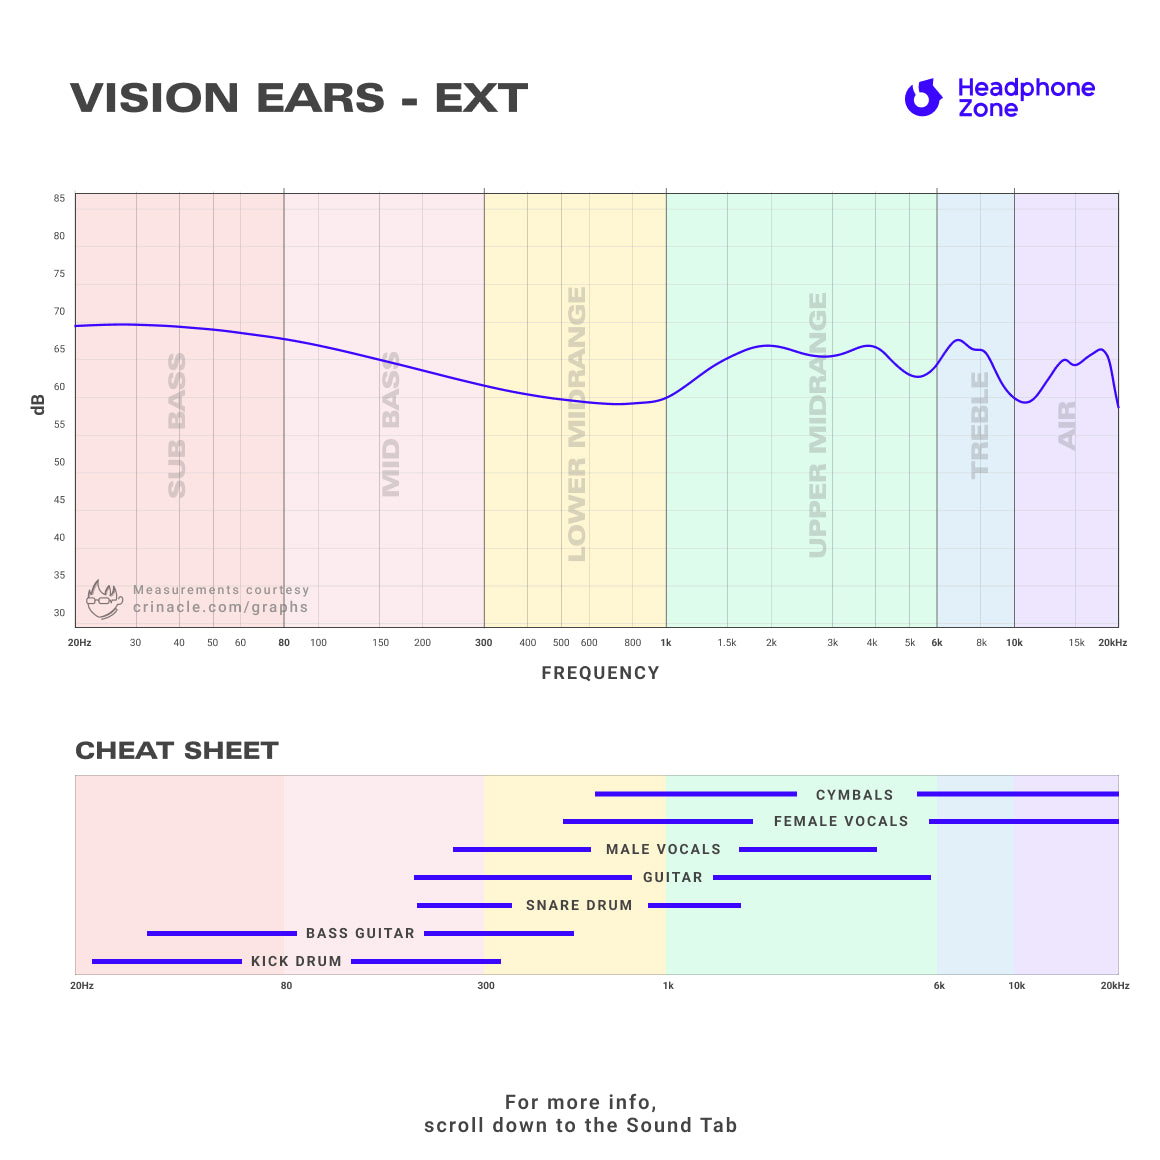 Vision Ears - EXT